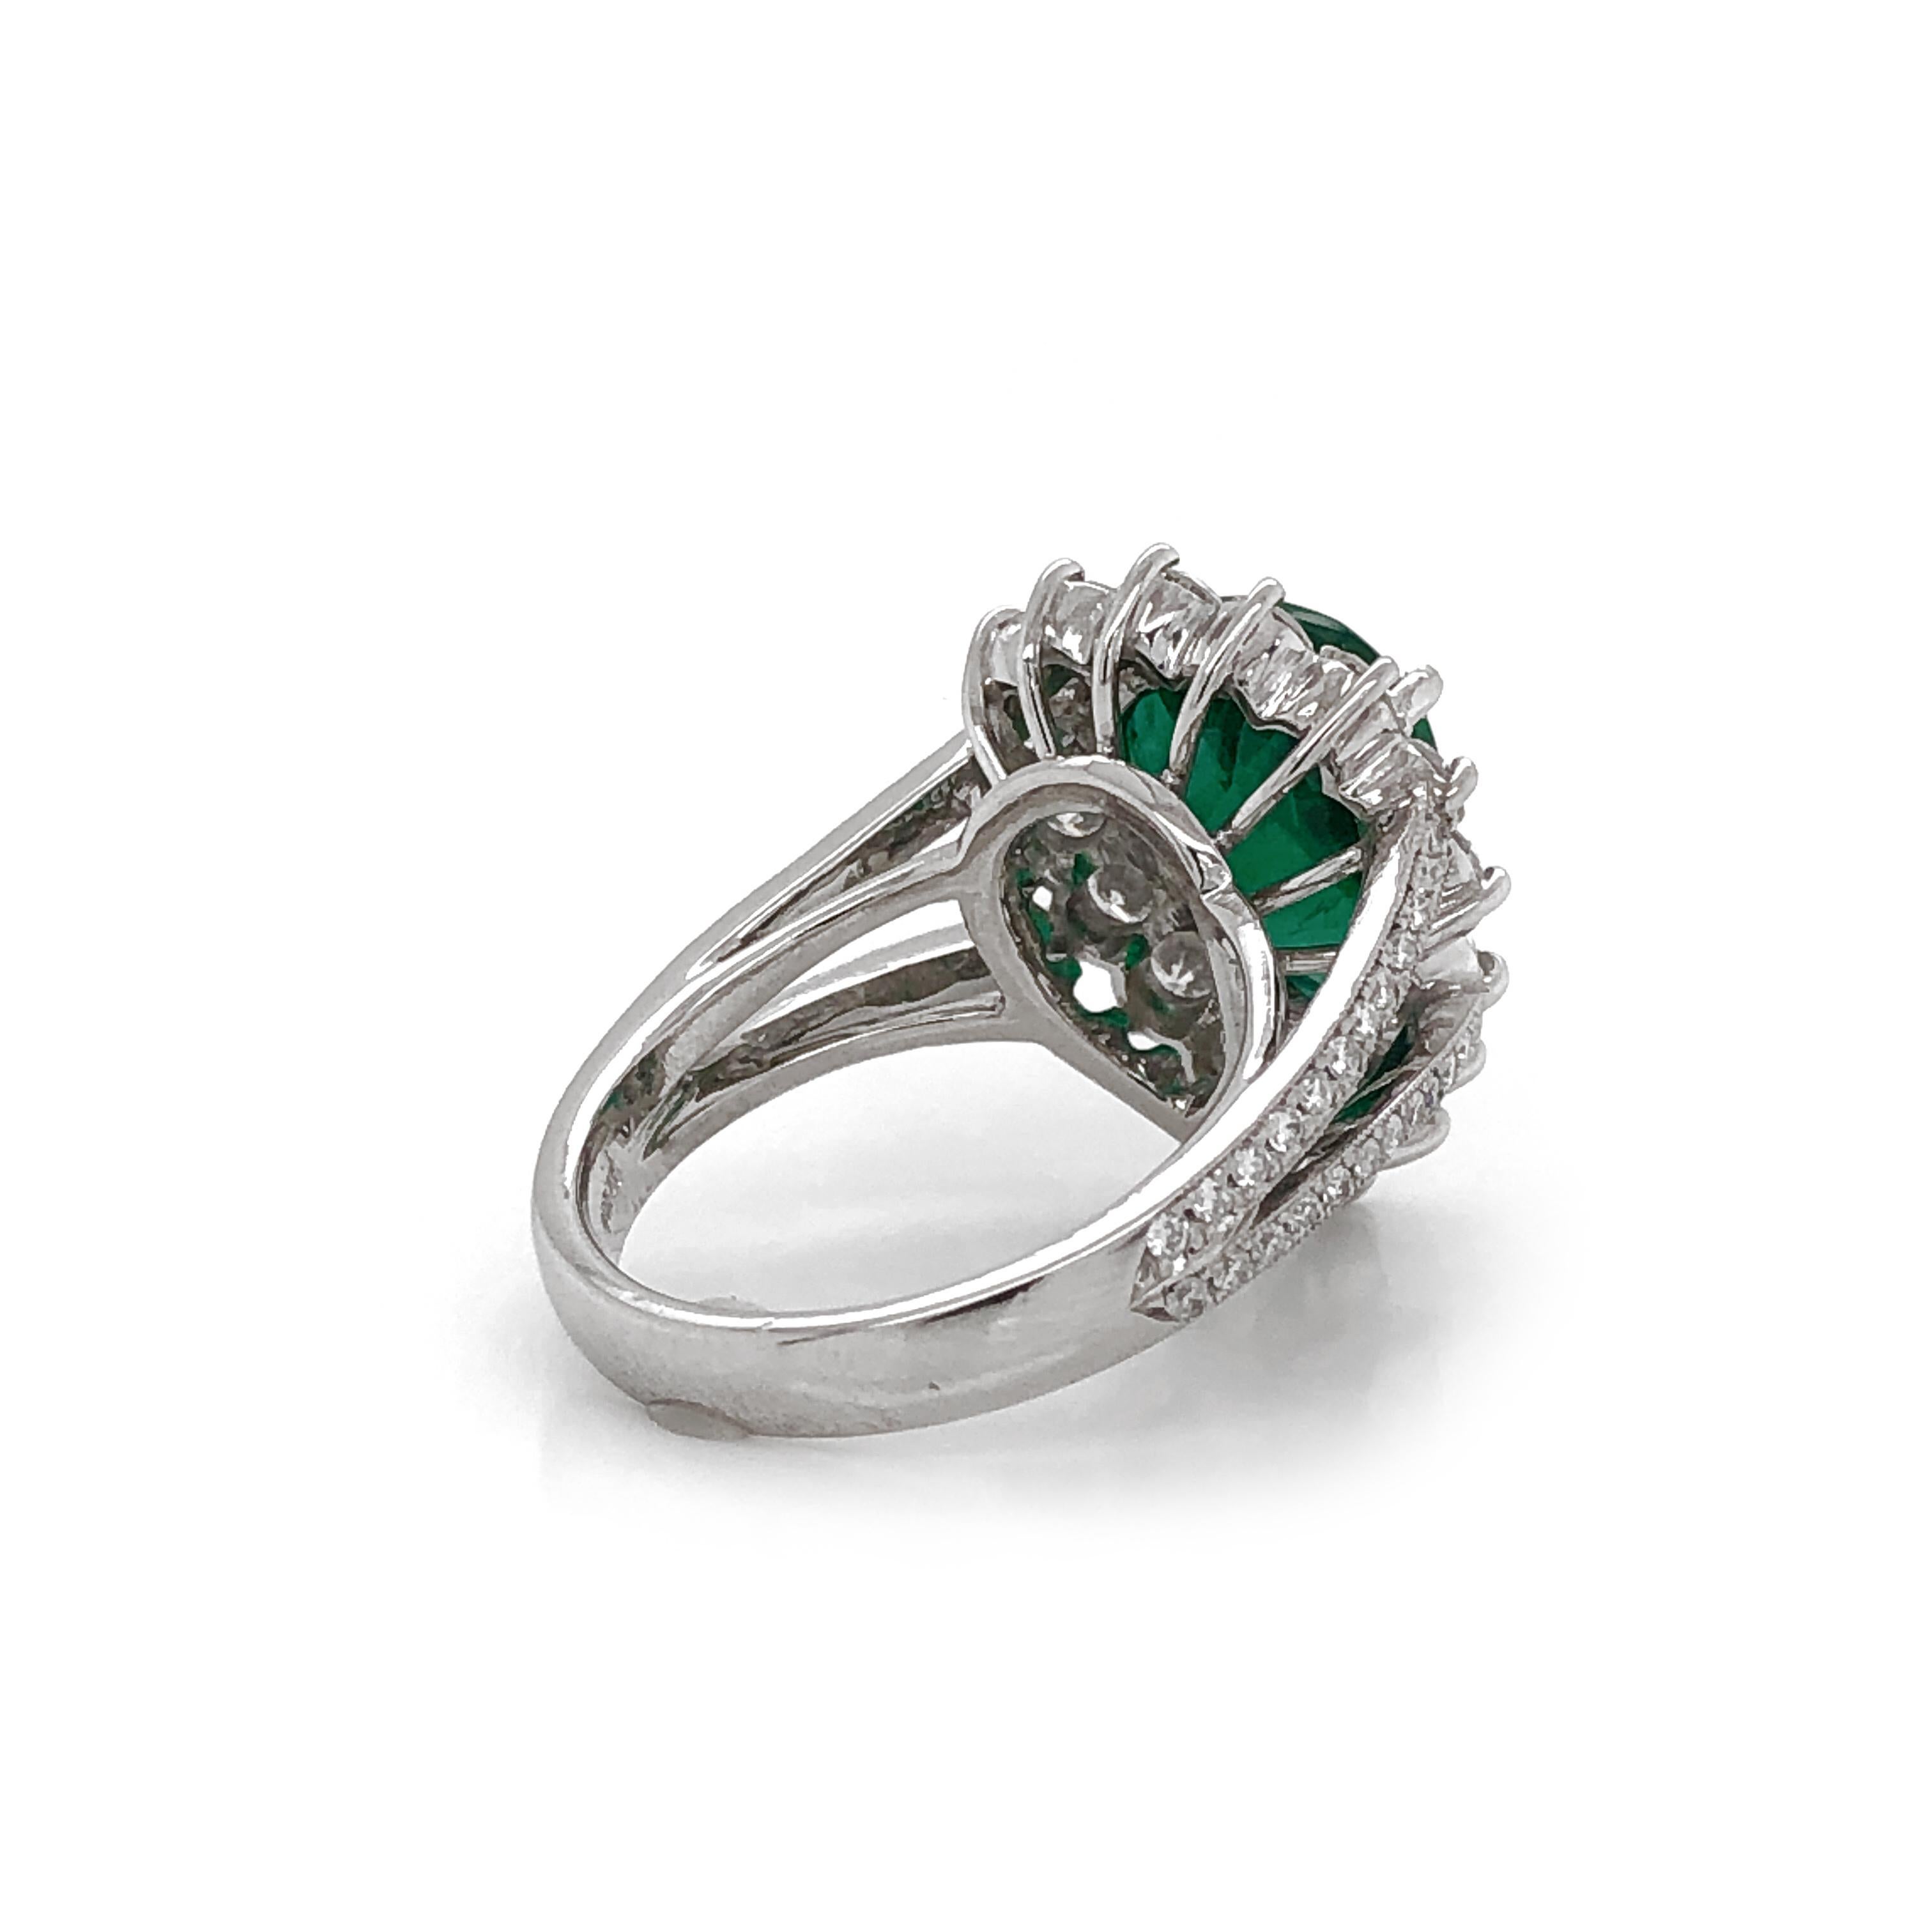 Certified Emerald Pear Cut 3.66 Carat Diamond 1.36 Carat Total Platinum Ring In New Condition For Sale In New York, NY